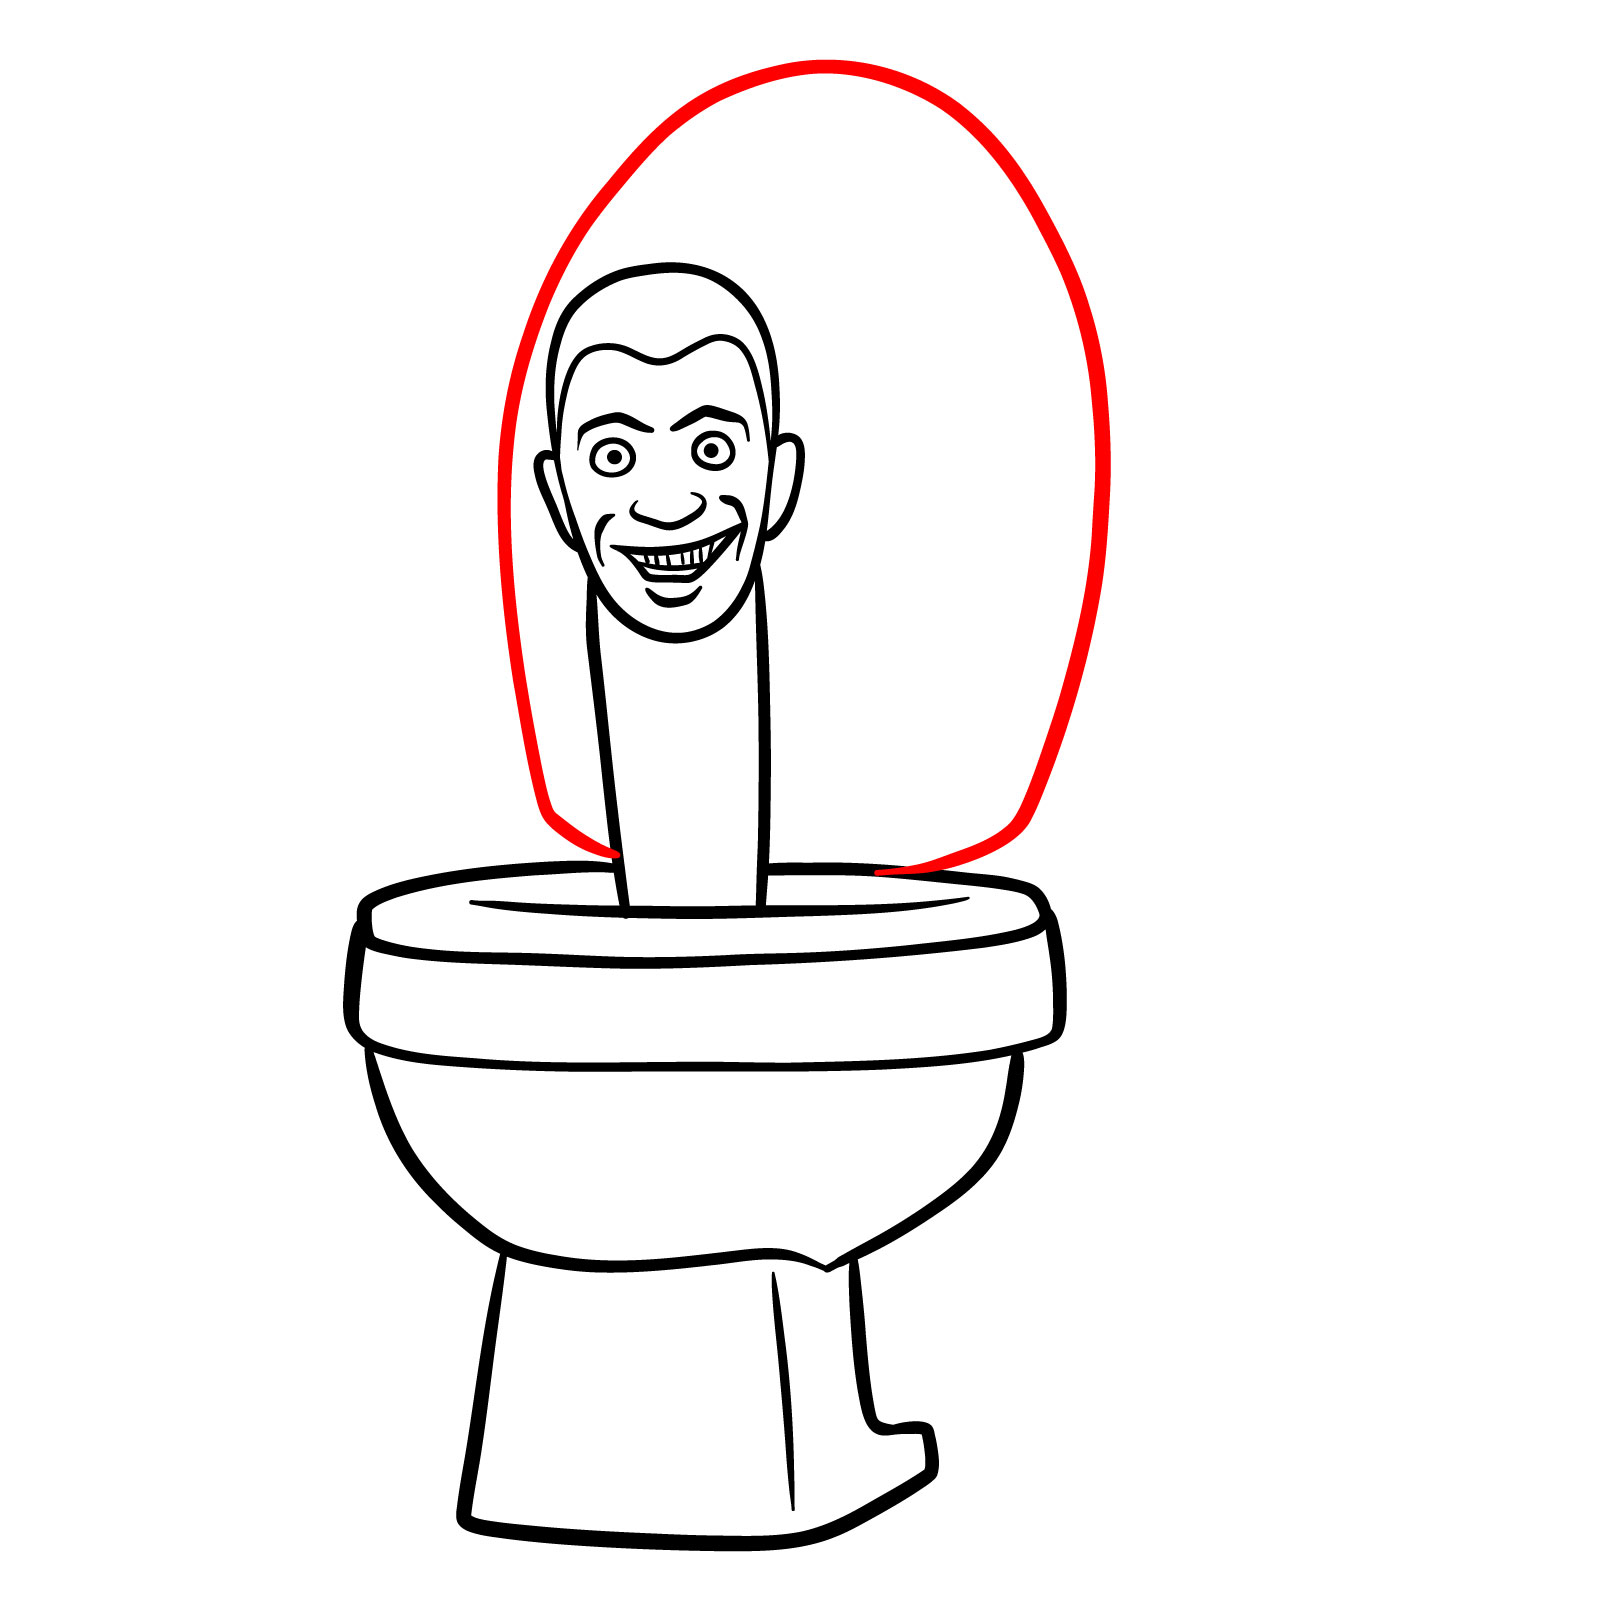 Adding a lid to the Skibidi Toilet drawing - step 10